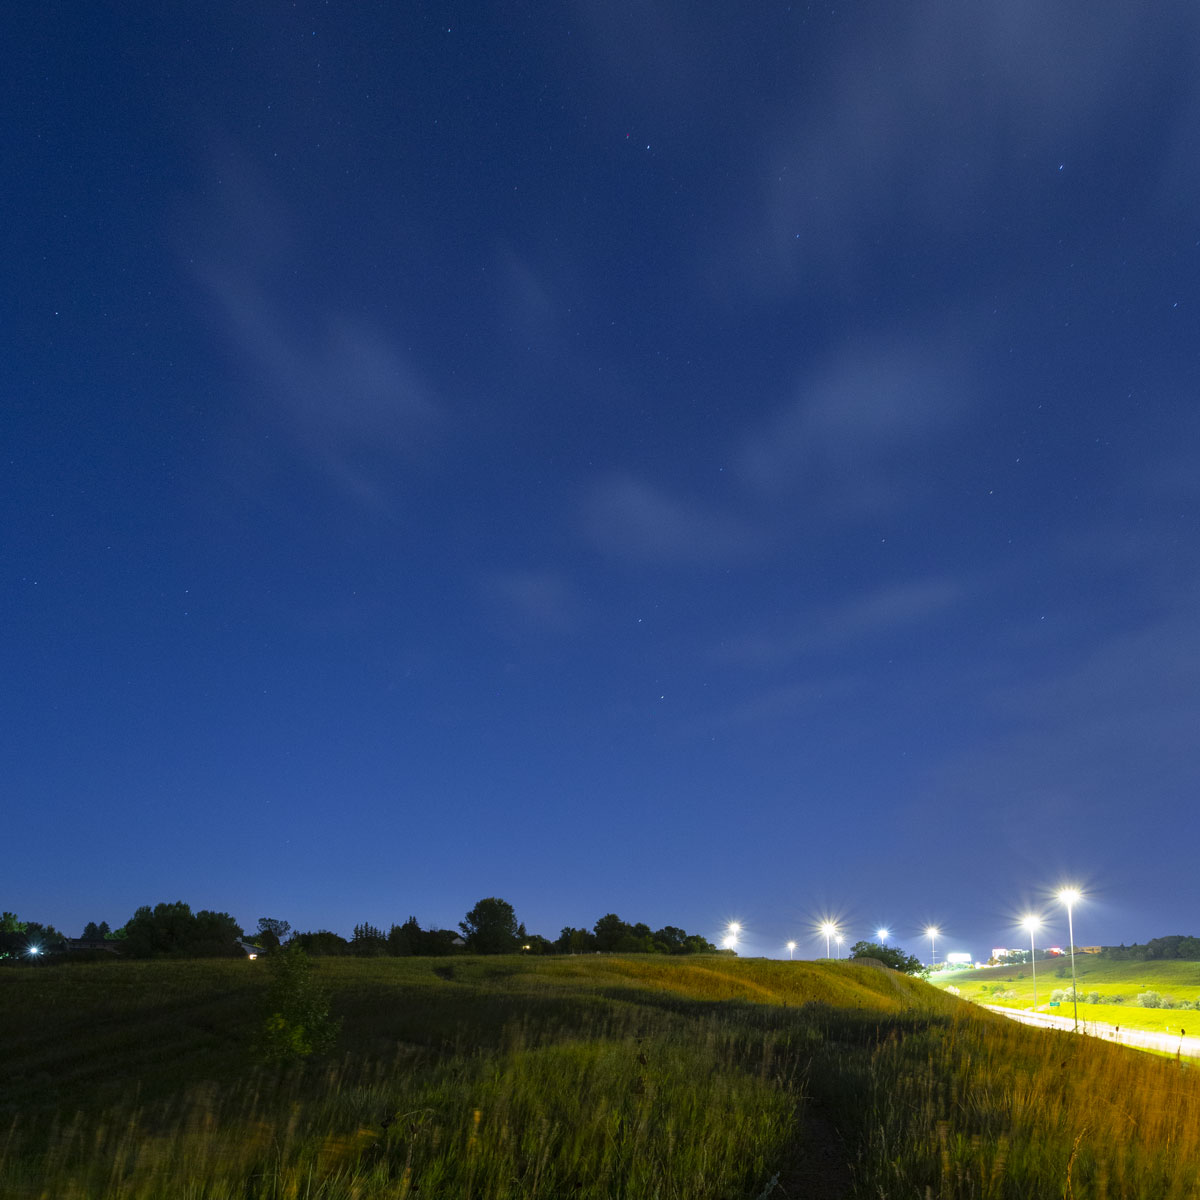 Through golden prairie grass in the dim light of dawn twilight a trail leads away toward a blue twilight sky filled with twinkling stars. The lights of a nearby interstate show as silvery starbursts.